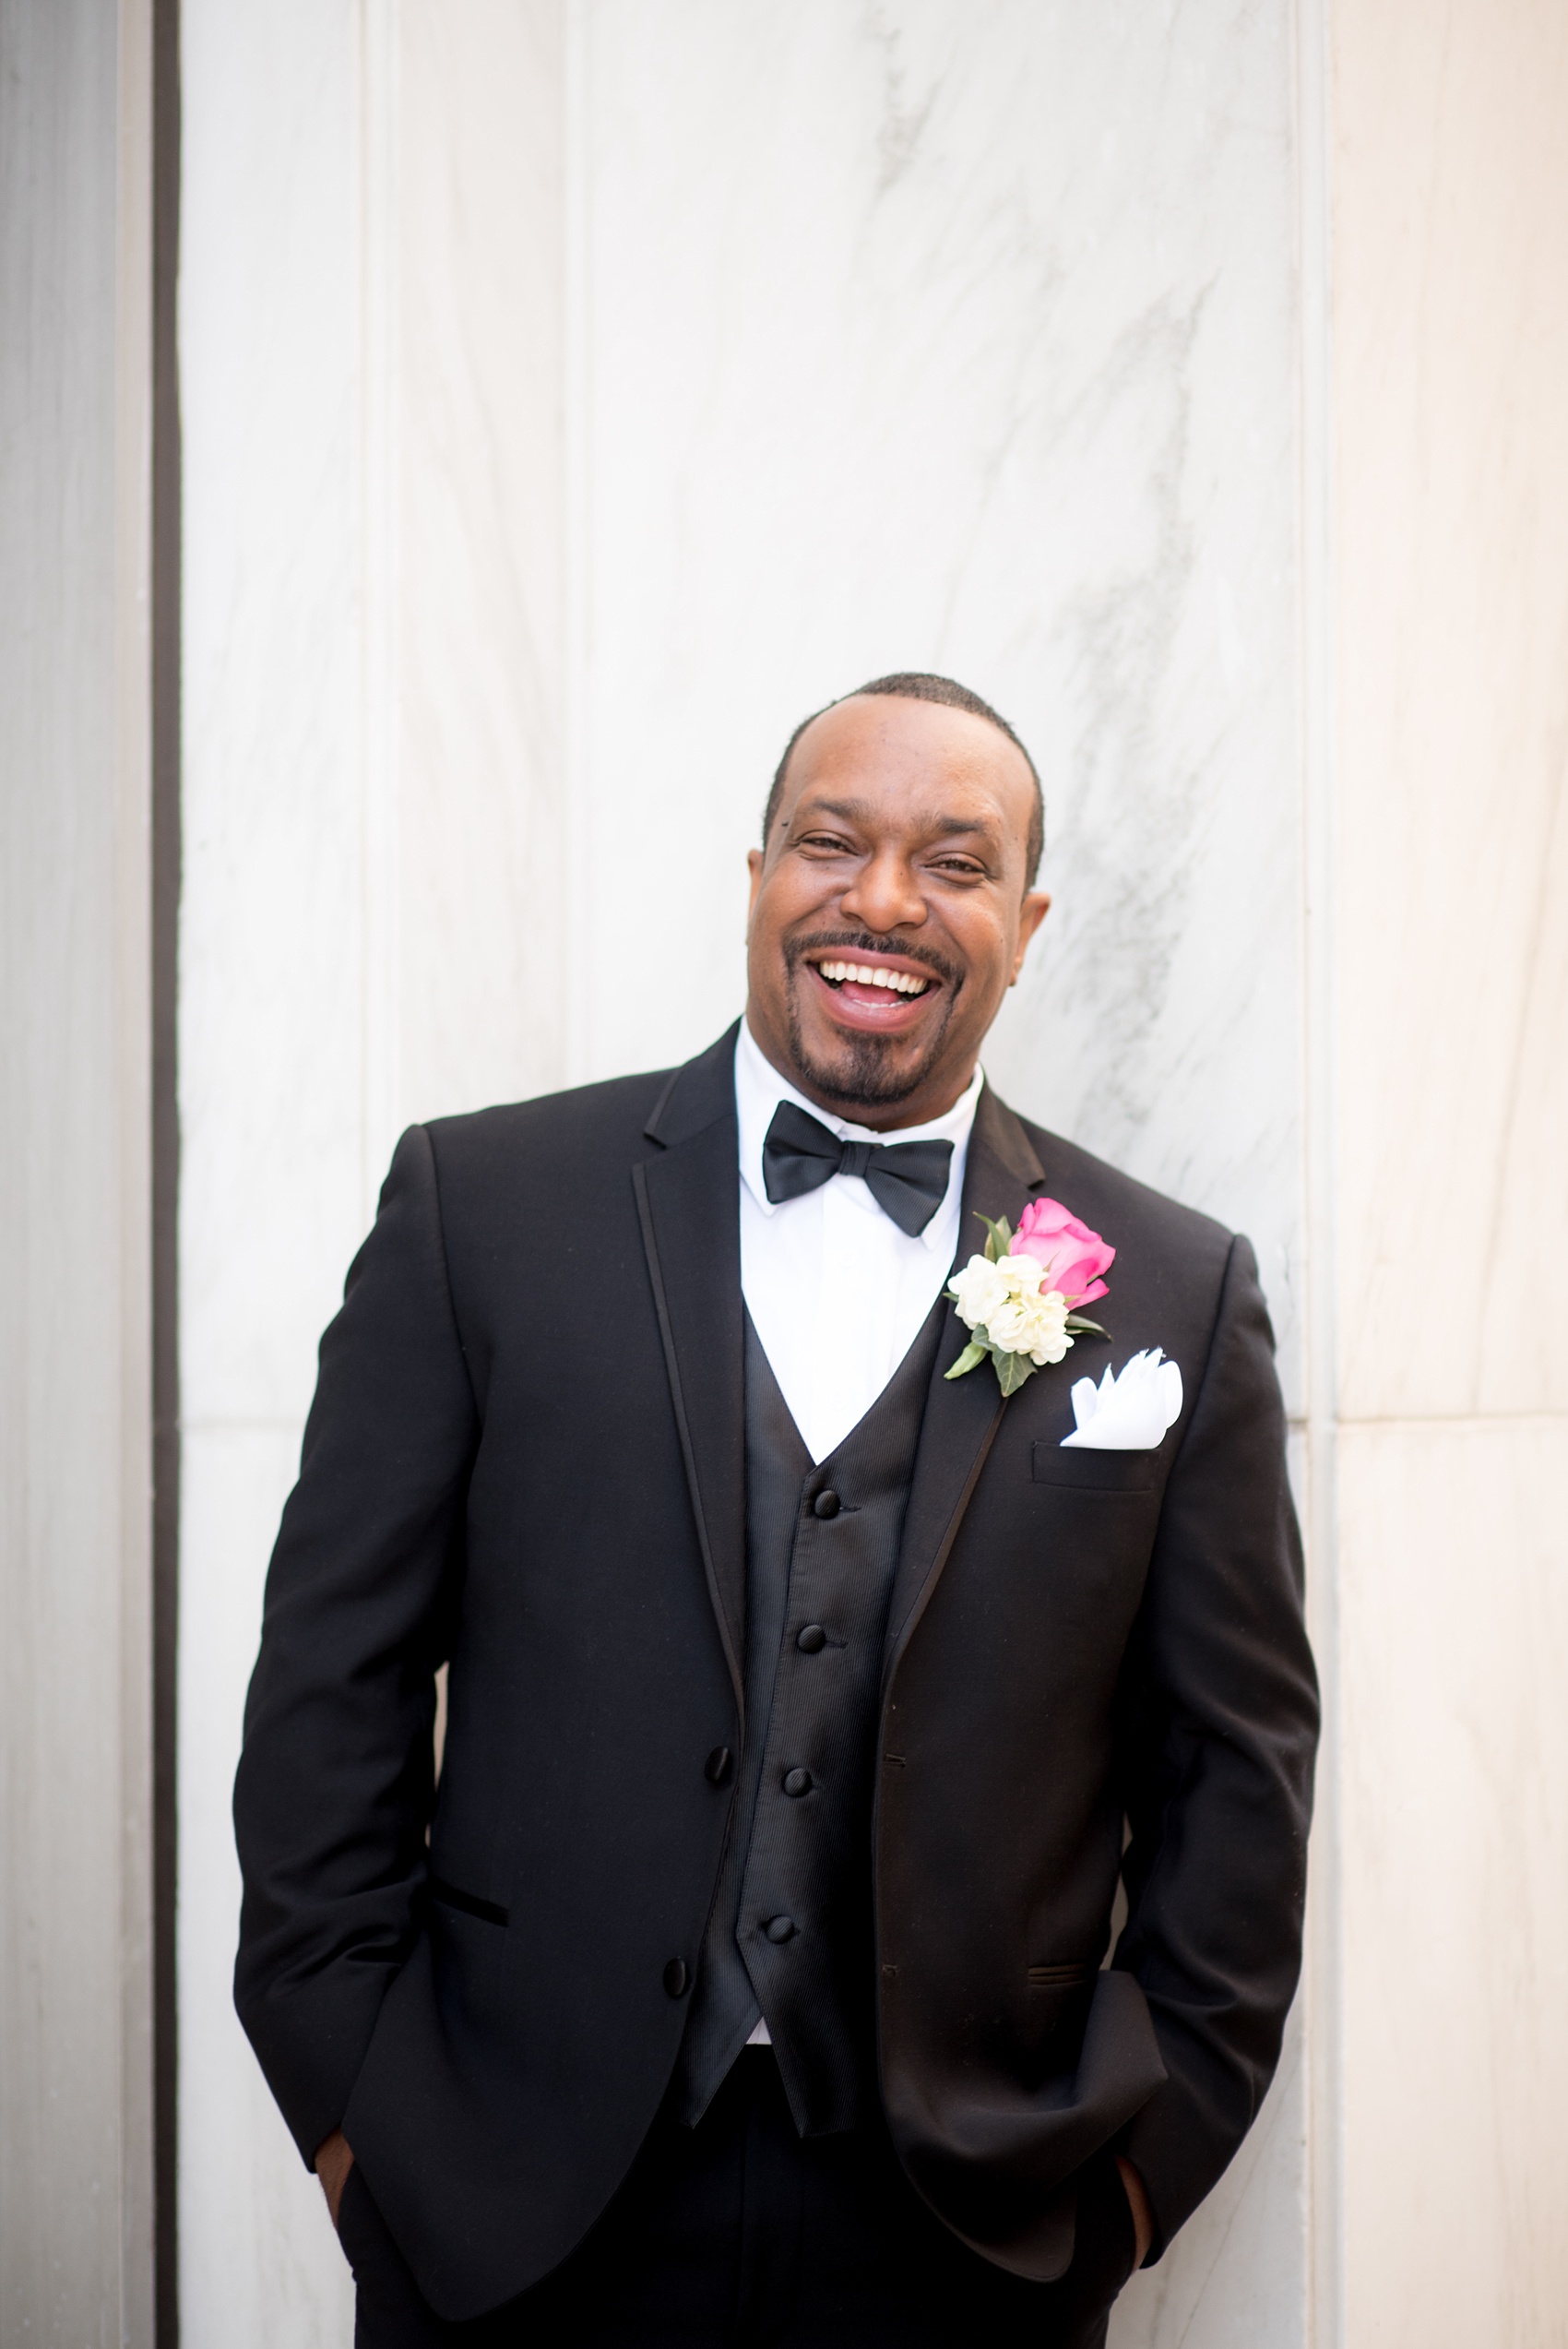 Mikkel Paige Photography photos of a small wedding at The Stockroom at 230 in downtown Raleigh, North Carolina. Image of the groom in a black tuxedo and pink rise boutonniere.